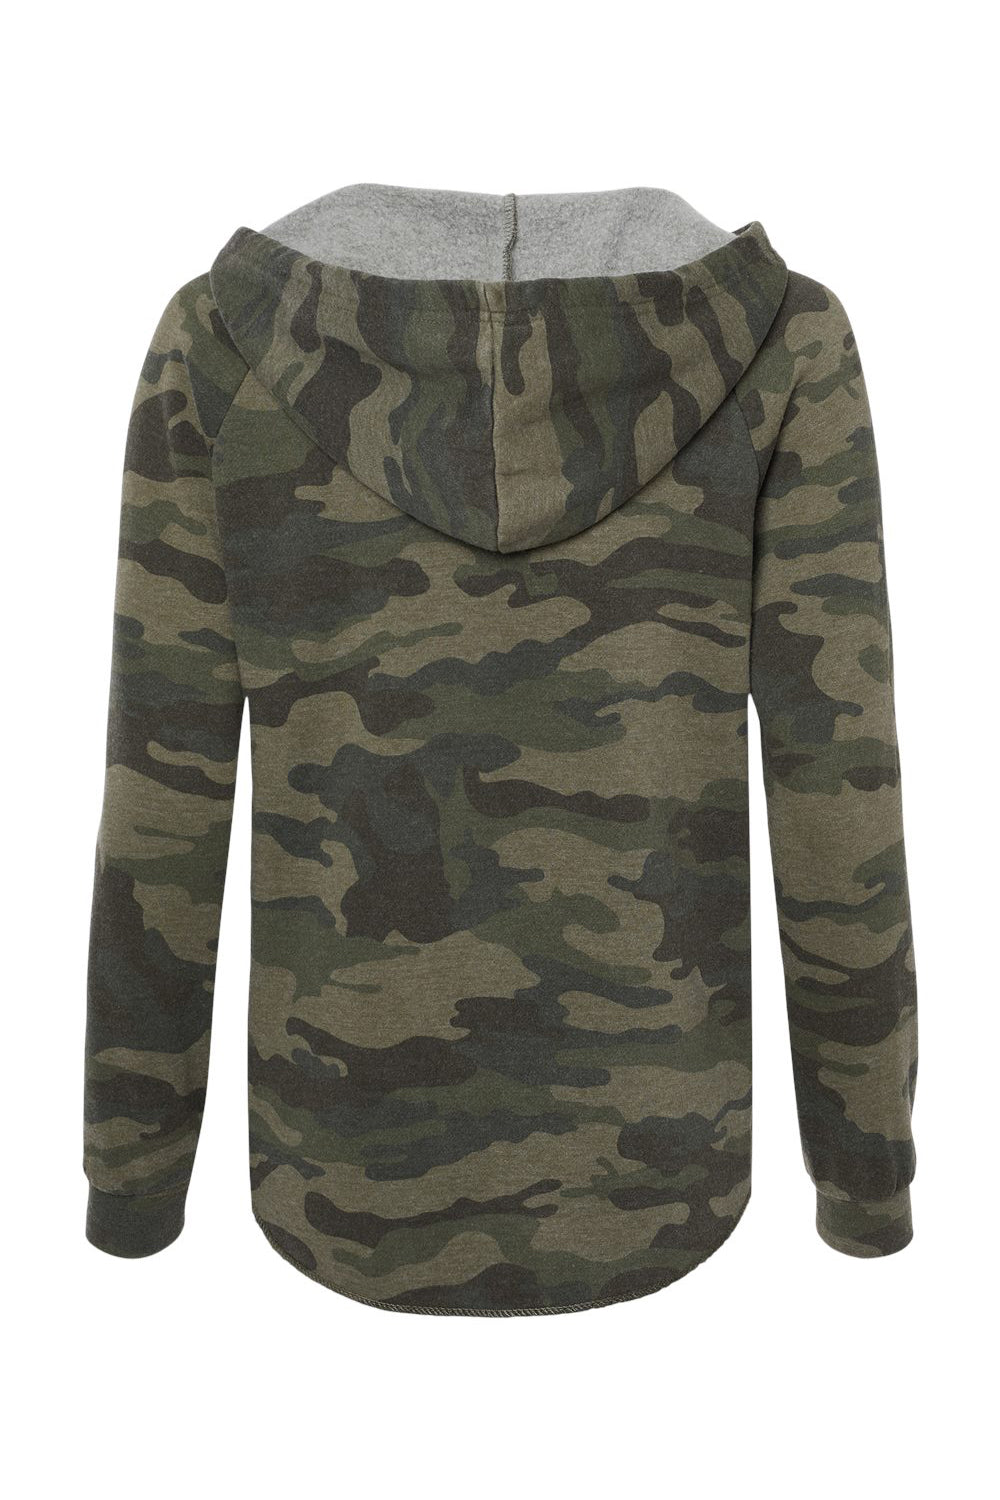 Independent Trading Co. PRM2500 Womens California Wave Wash Hooded Sweatshirt Hoodie Heather Forest Green Camo Flat Back